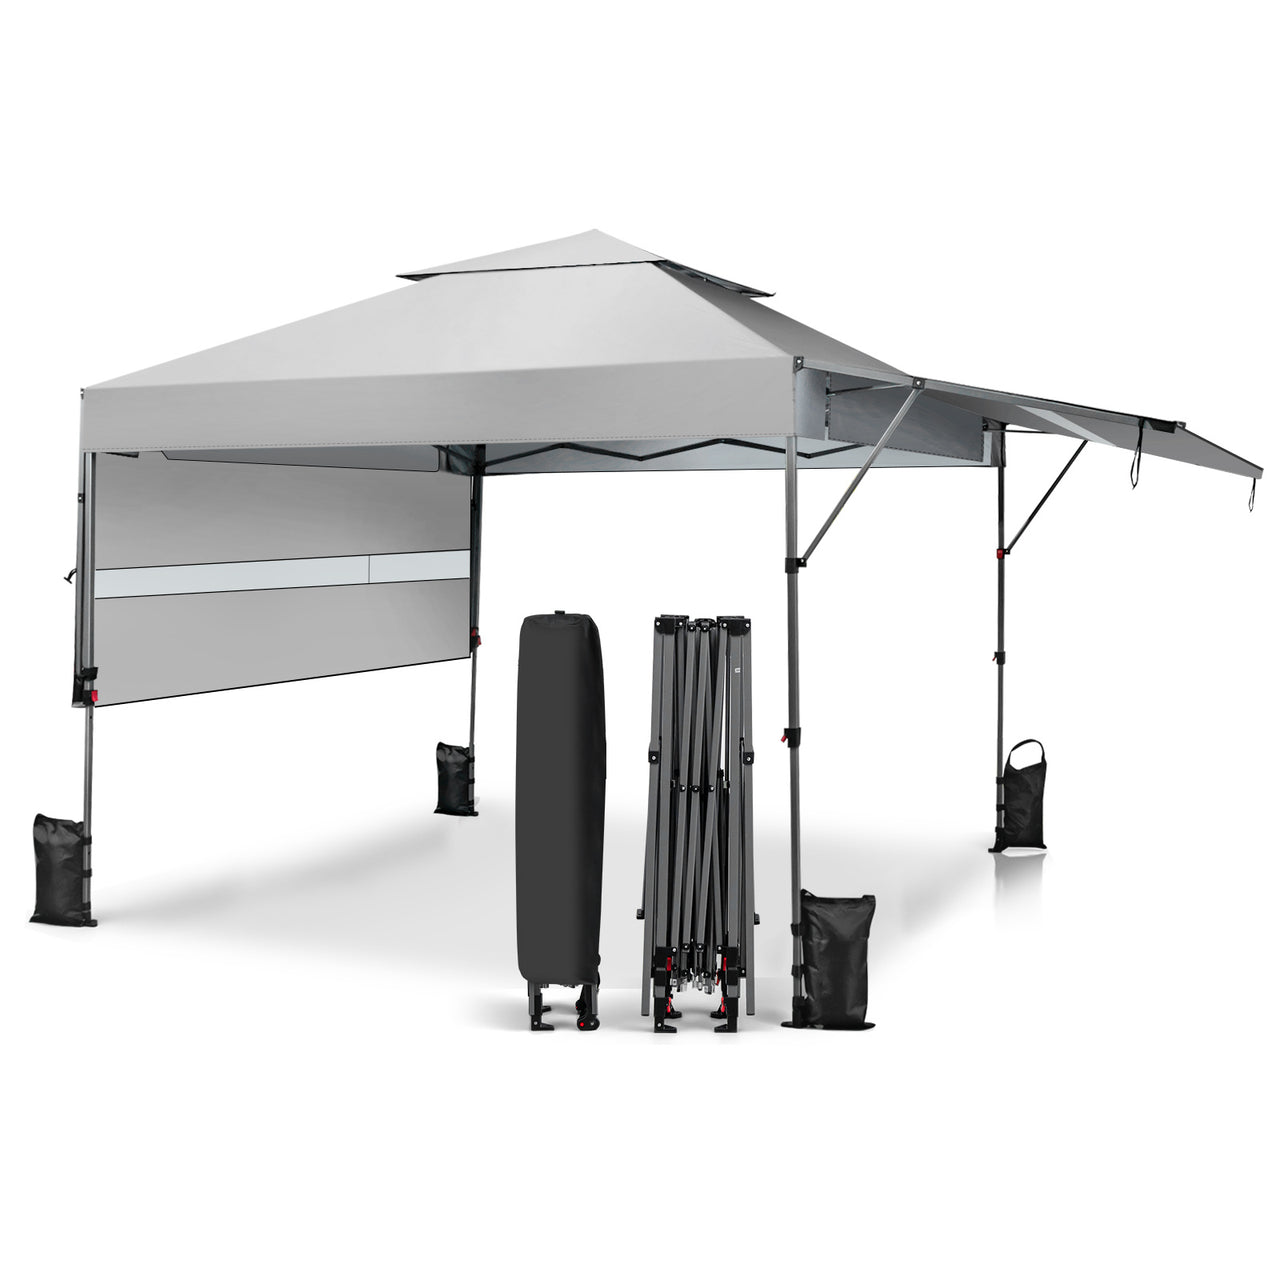 10 x 17.6 Feet Outdoor Instant Pop-up Canopy Tent with Dual Half Awnings - Gallery View 1 of 10